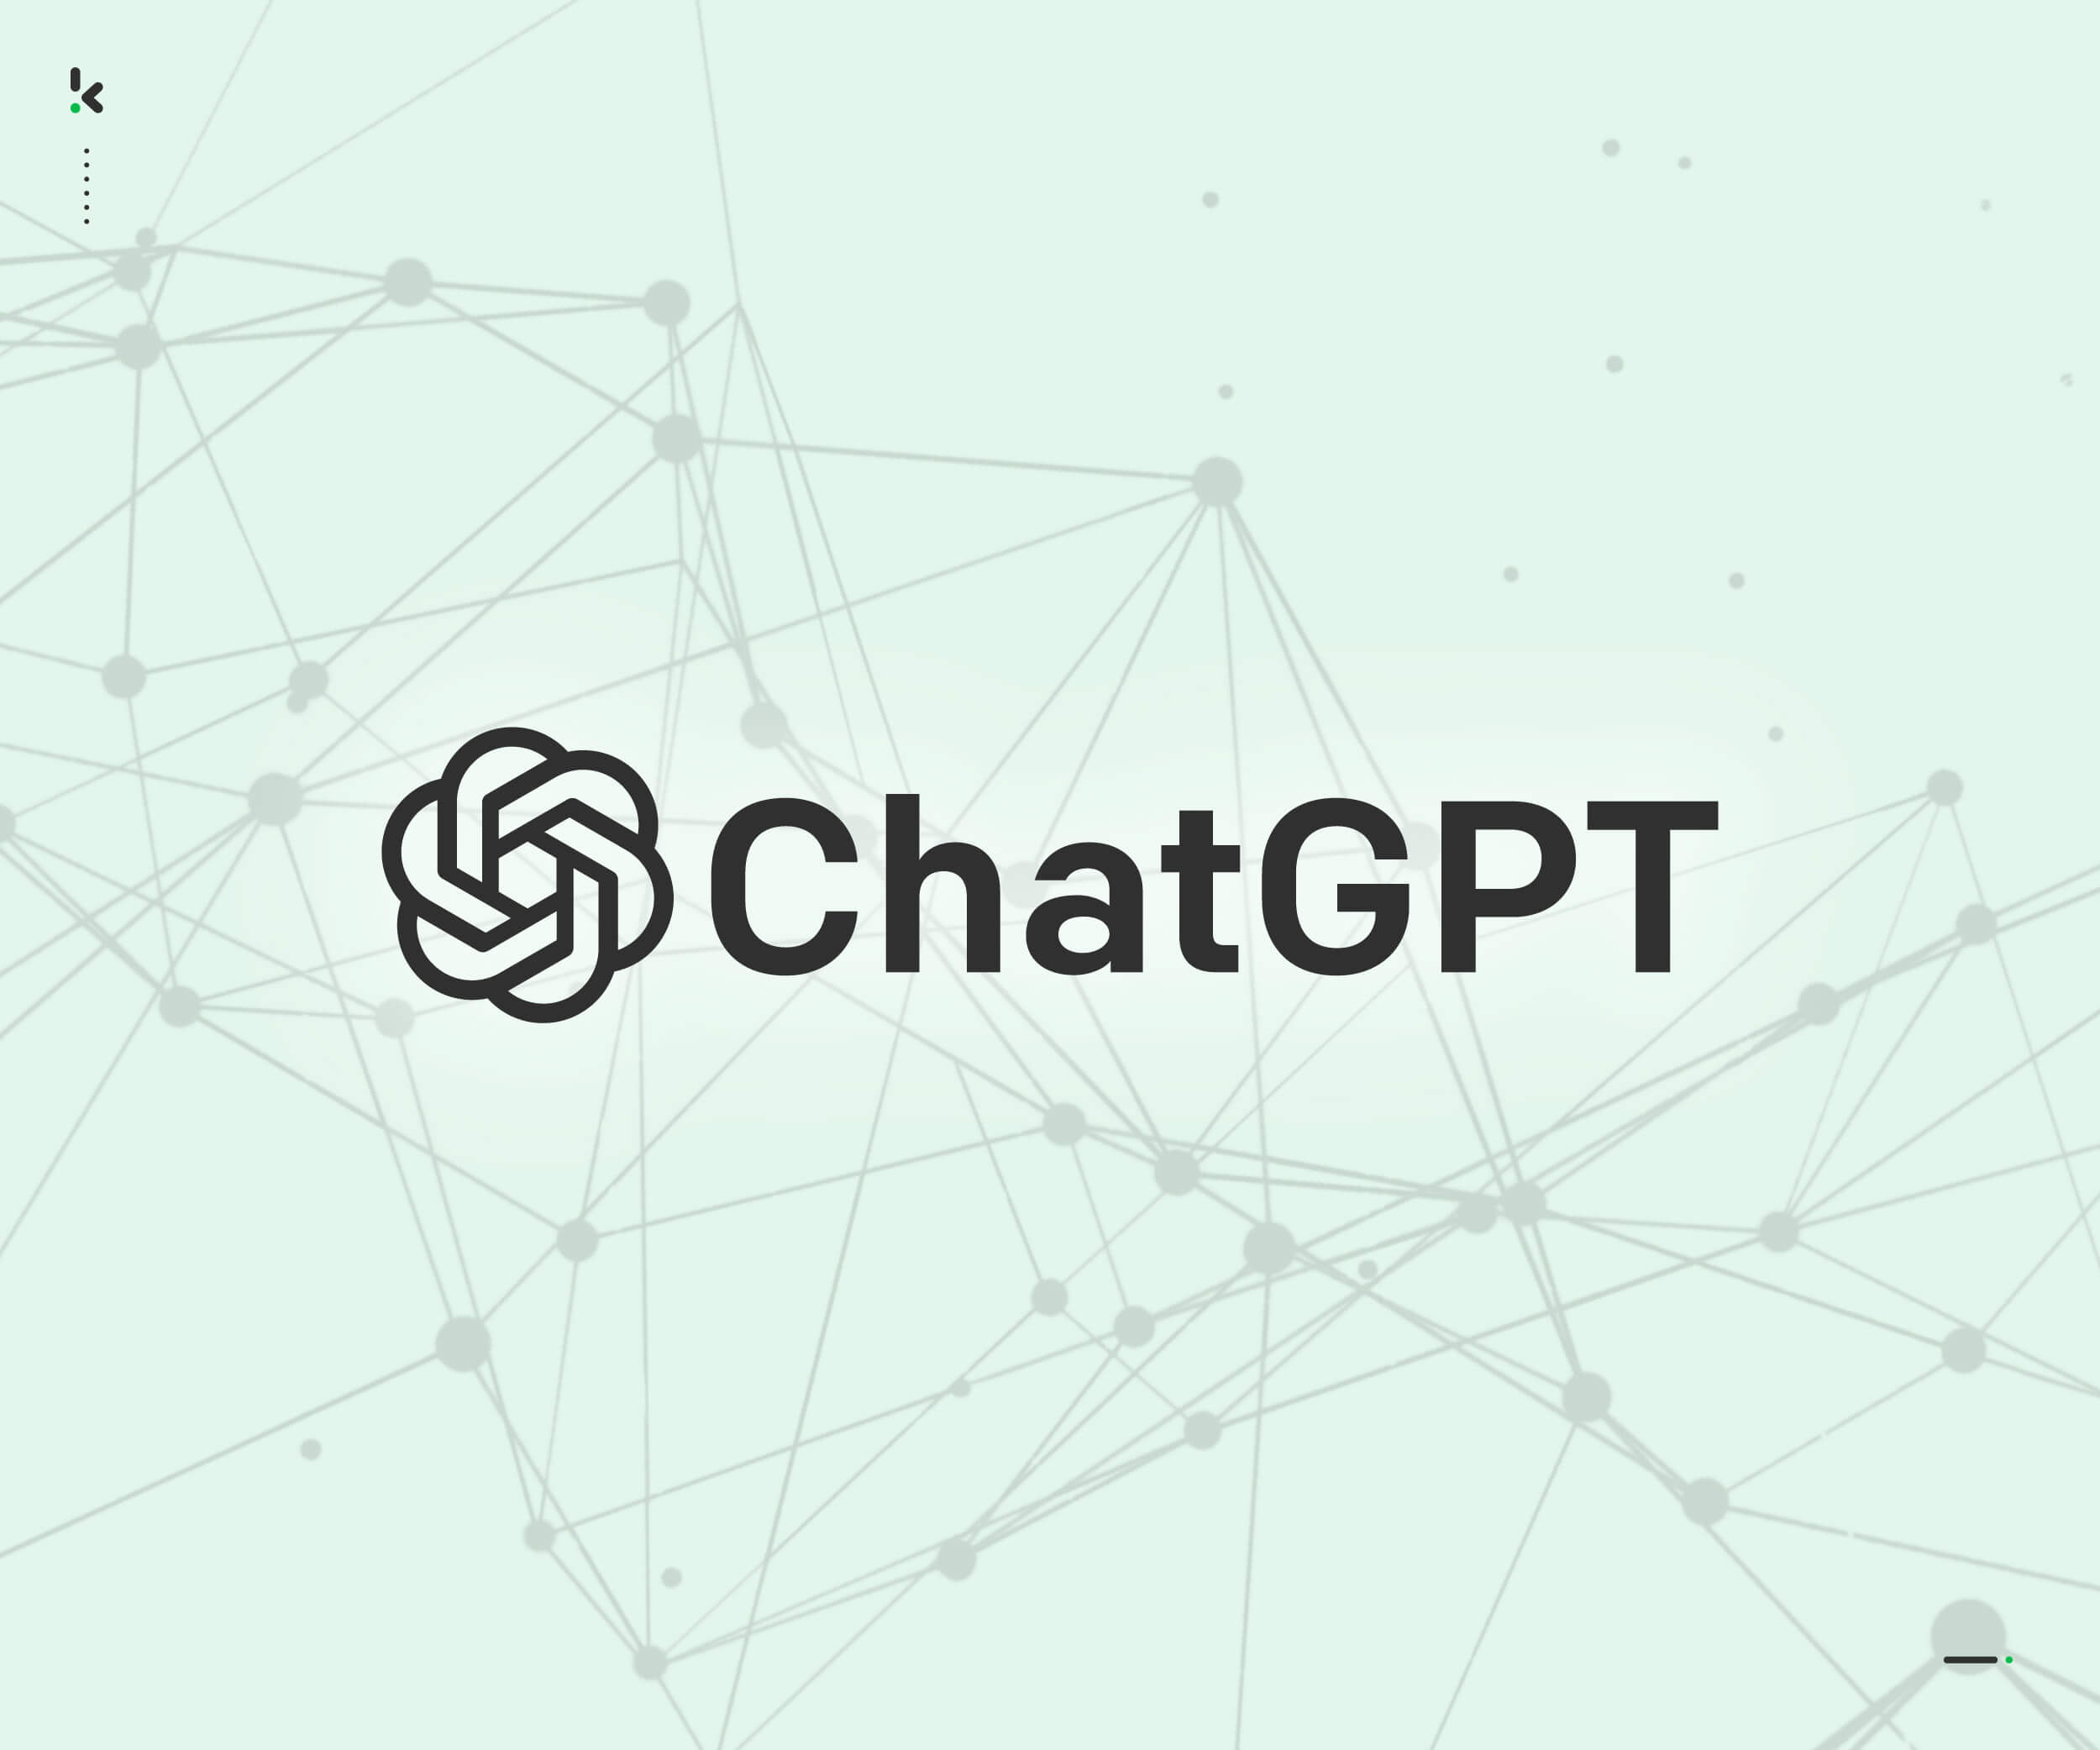 History of ChatGPT Language Models
The Architecture of ChatGPT
How ChatGPT Works
ChatGPT Applications and Use Cases
LiFuture of ChatGPT and AI Language Models
ChatGPT related Facts
ChatGPT related FAQs
